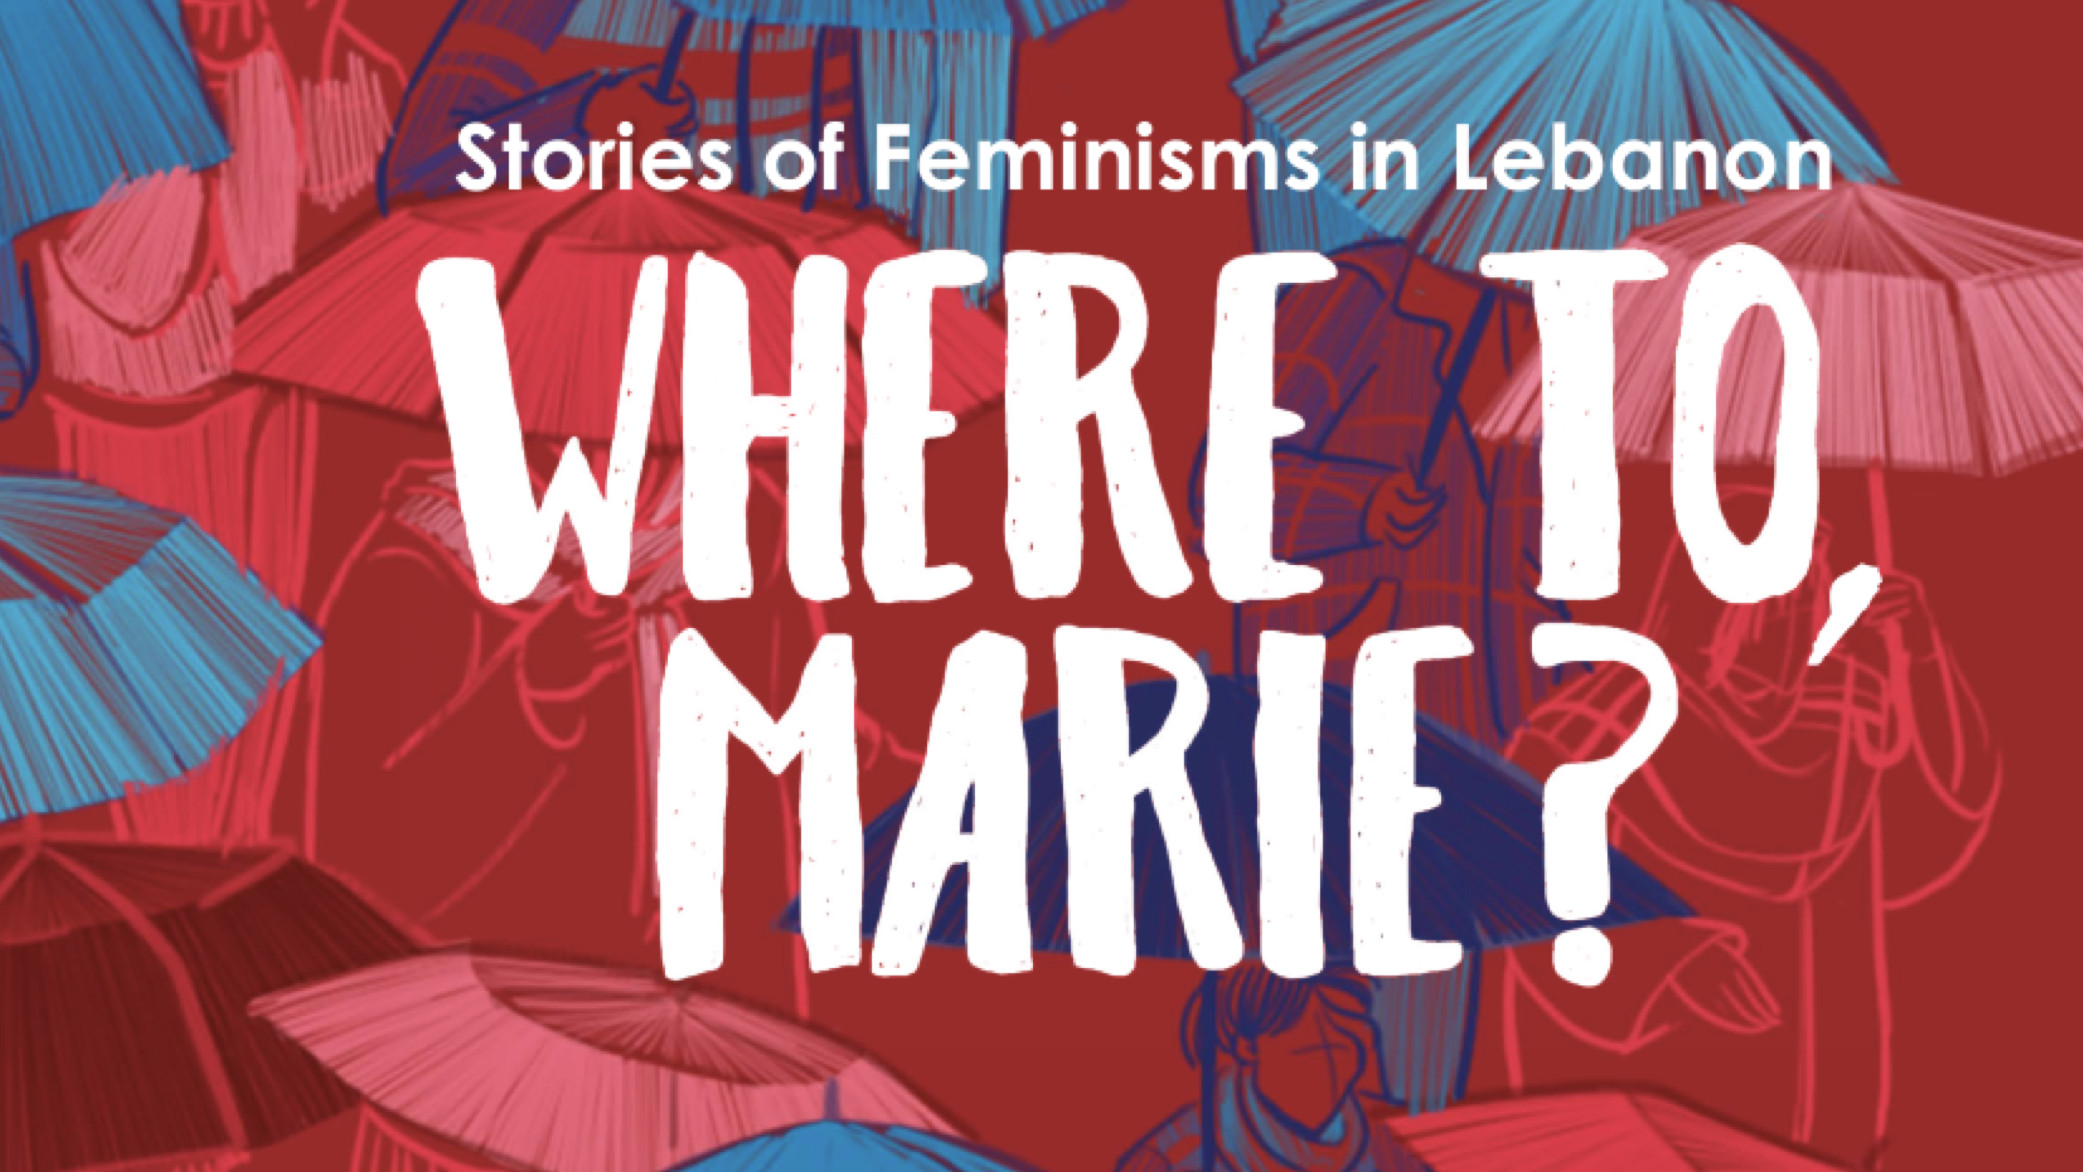 Where to, Marie?” - Rosa-Luxemburg-Stiftung